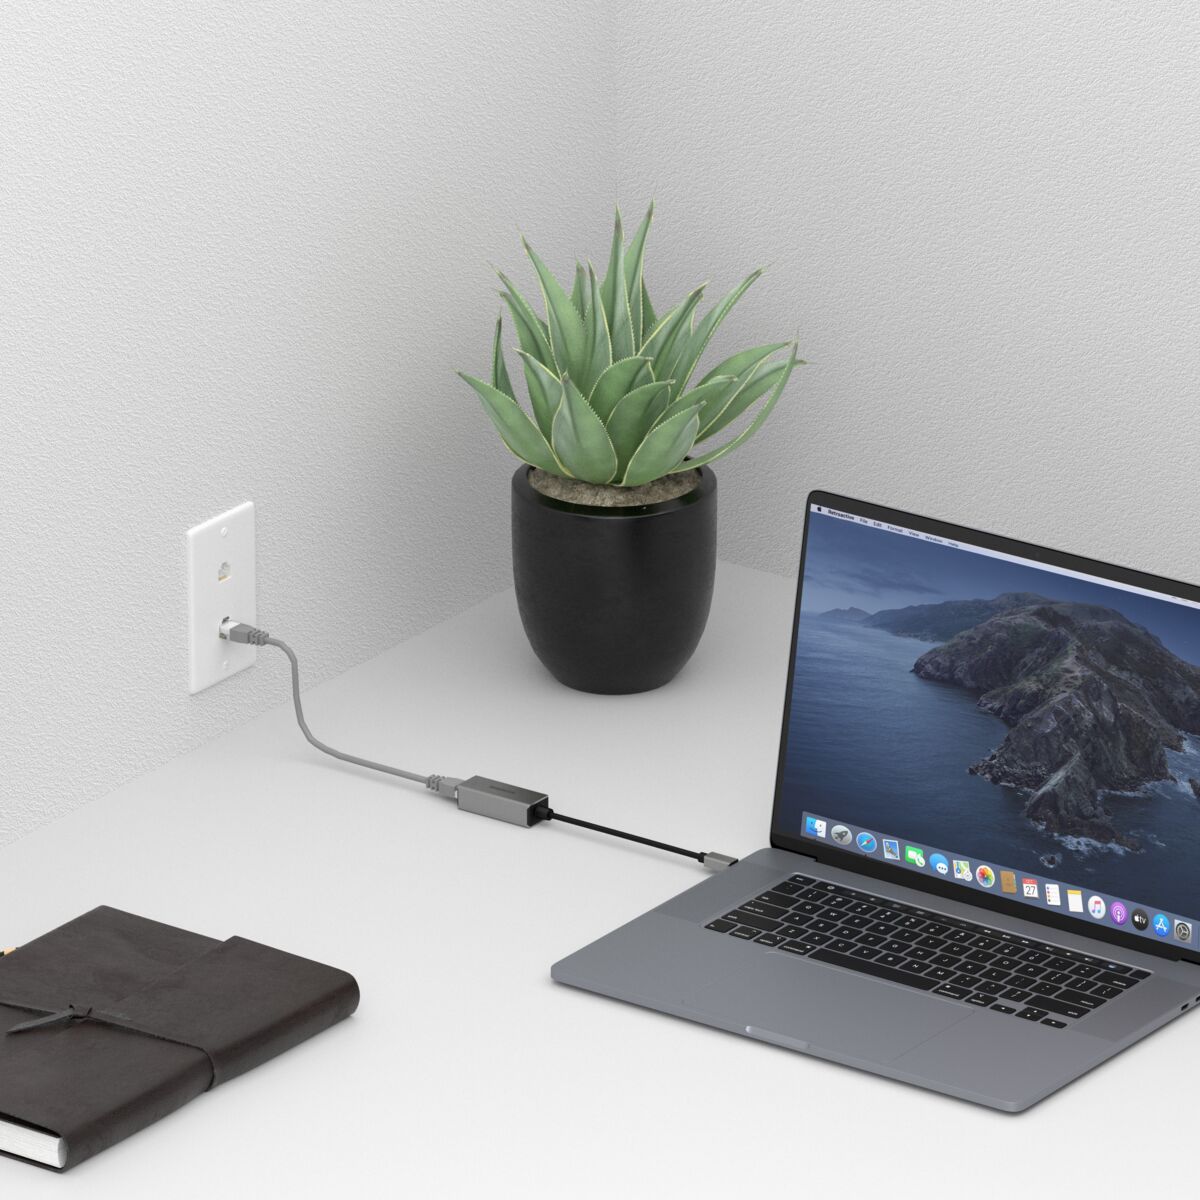 USB-C to Ethernet adapter - Ambiance Image of a laptop connected directly to network using an USB-C to Ethernet adapter | Marmitek